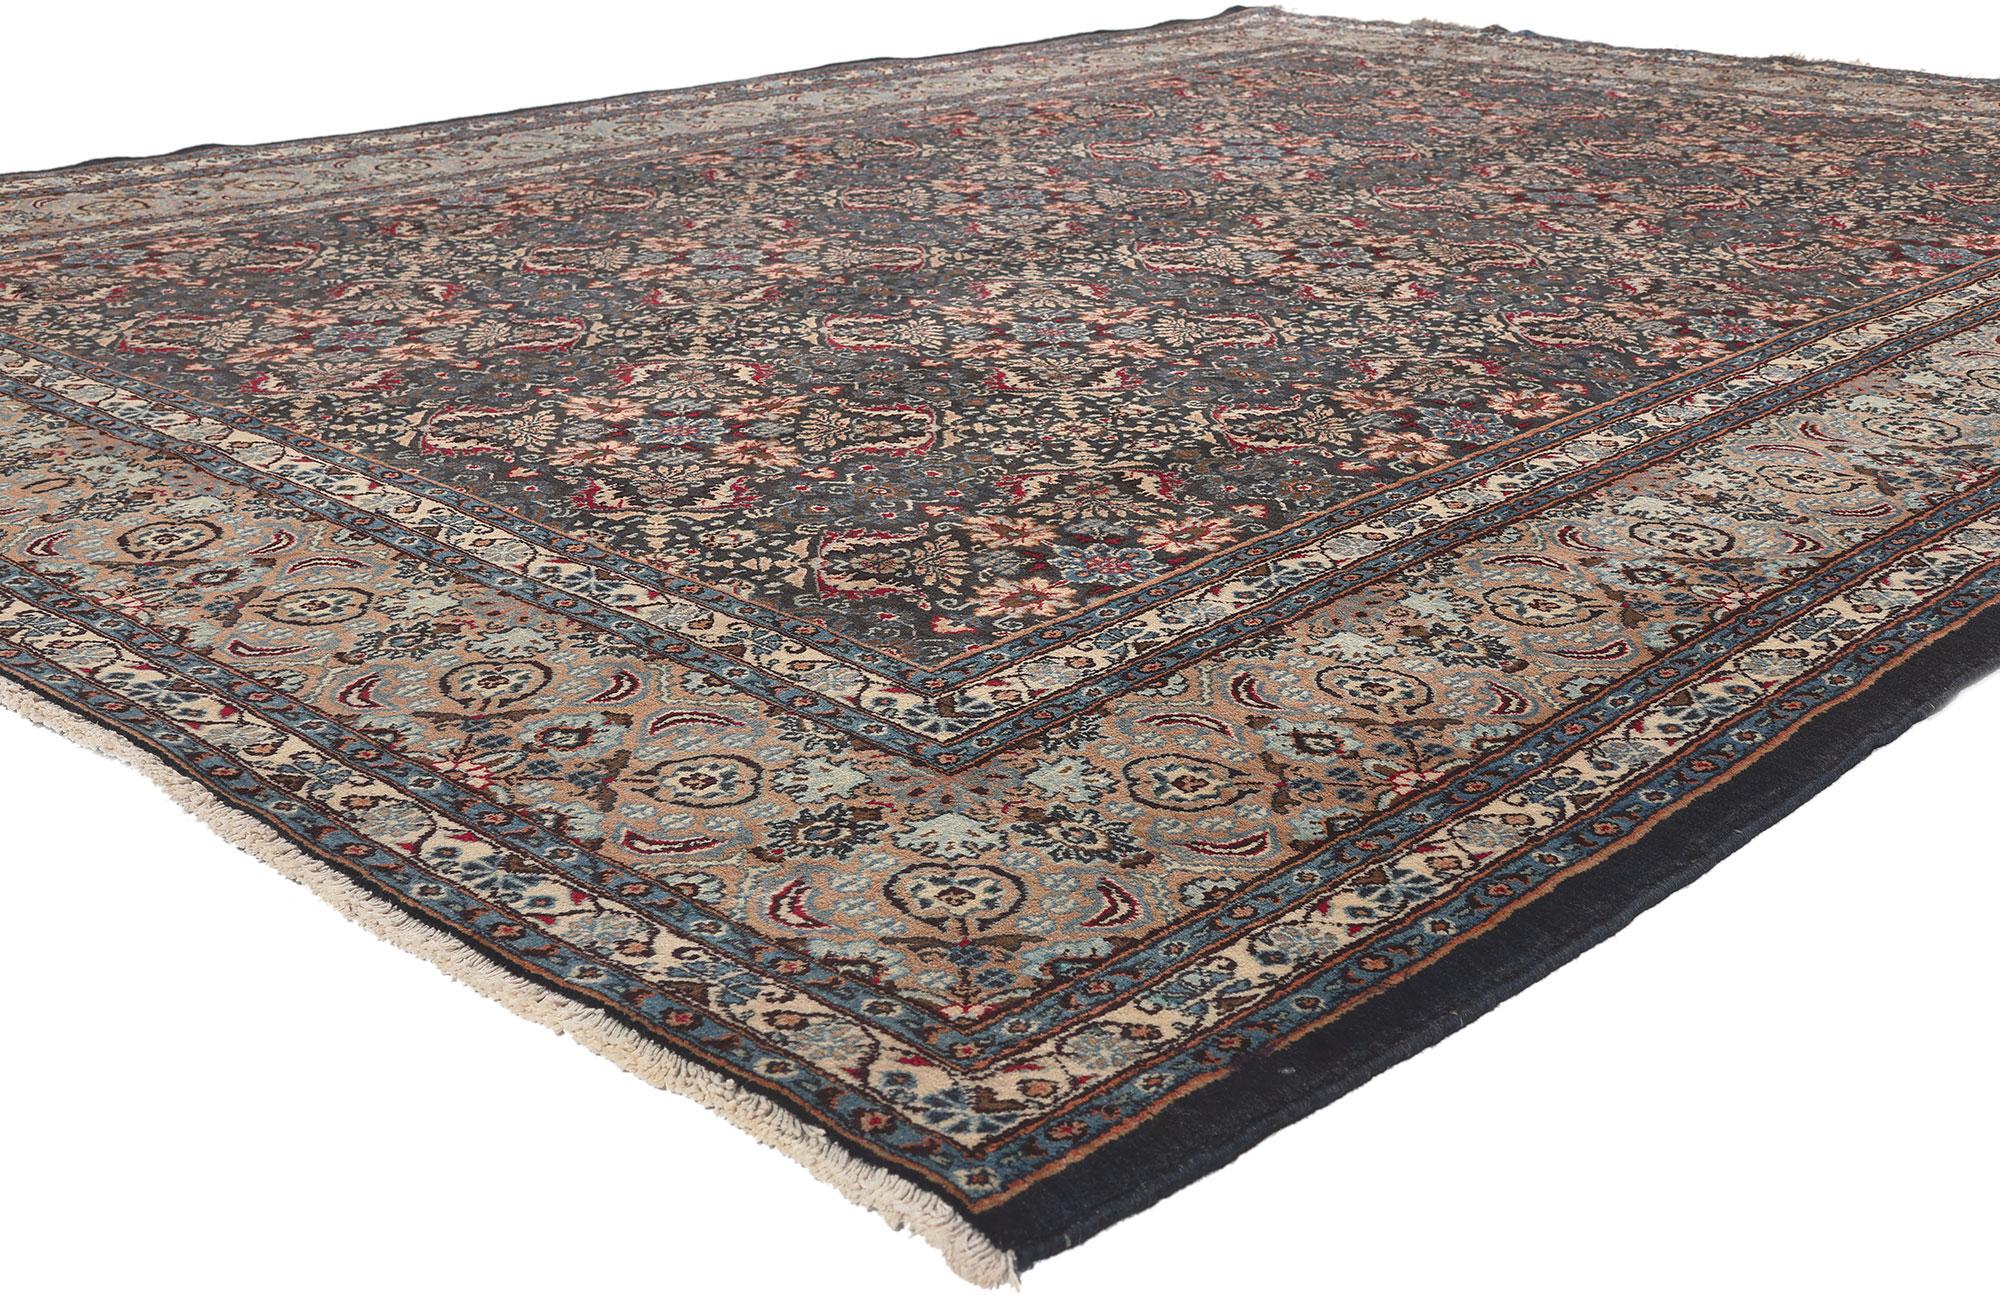 76188 Vintage Persian Mashhad Rug, 08'05 x 11'02.
Traditional sensibility meets regal enchantment in this hand knotted wool vintage Persian Mashhad rug. The stylish levels of complexity and refined color palette woven into this piece work together